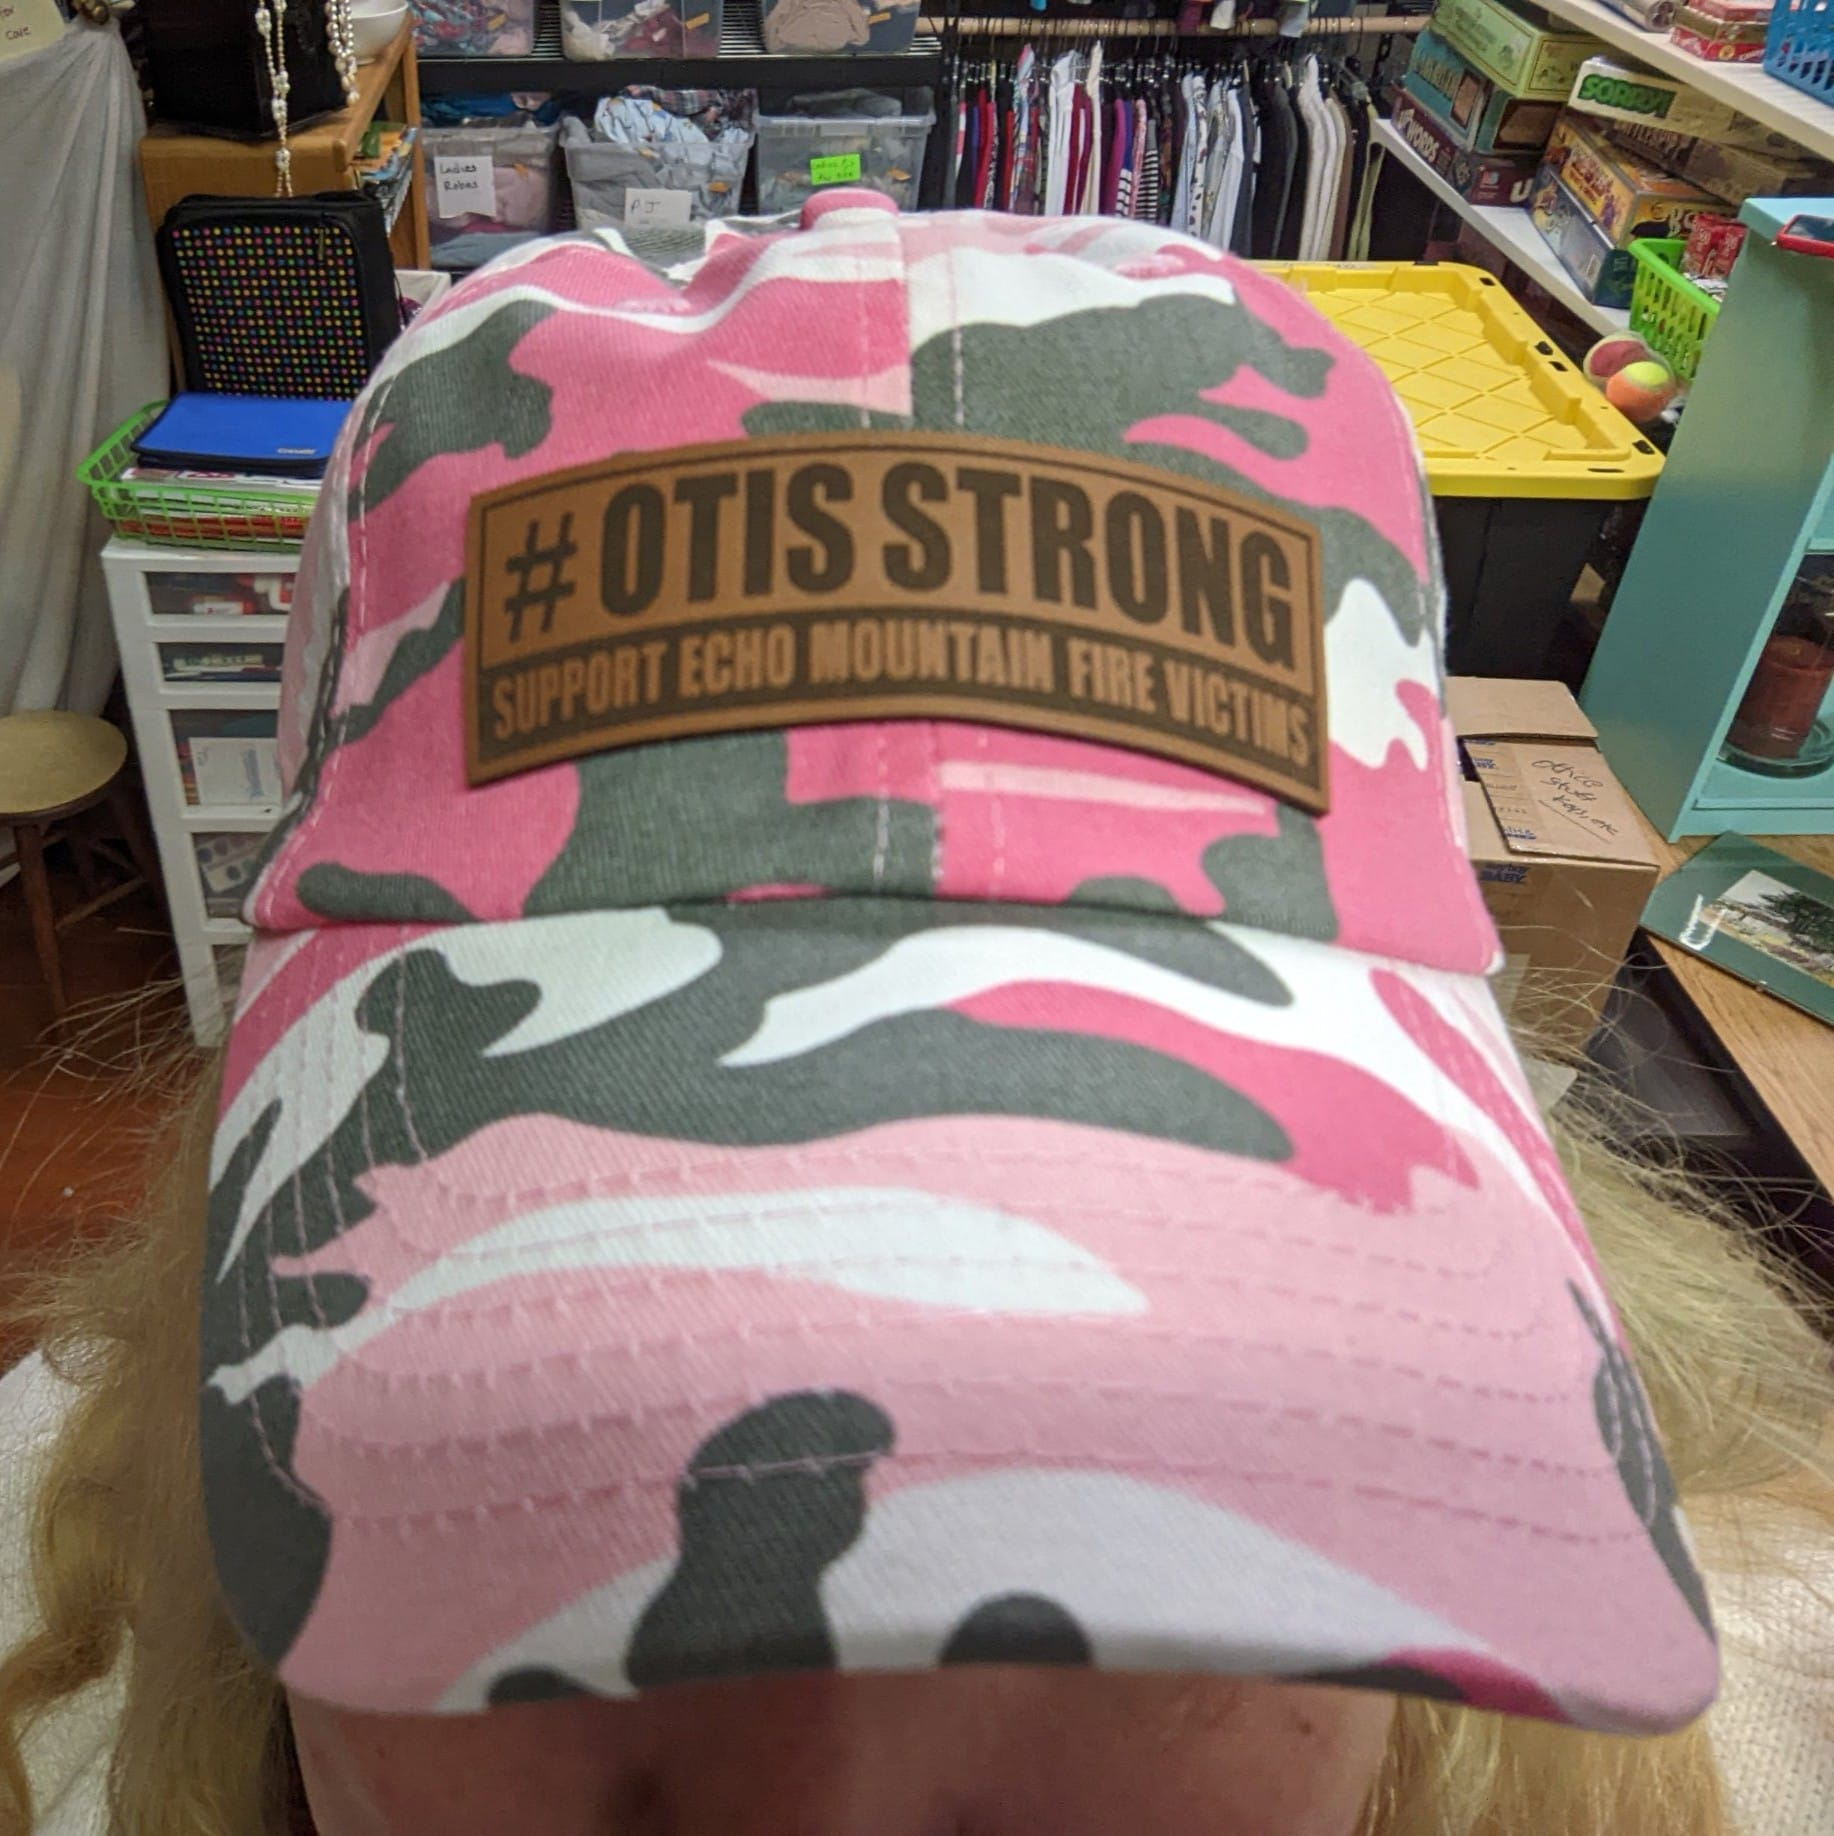 pink camoflague baseball cap with the logo #OtisStrong Support Echo Mountain Fire Victims